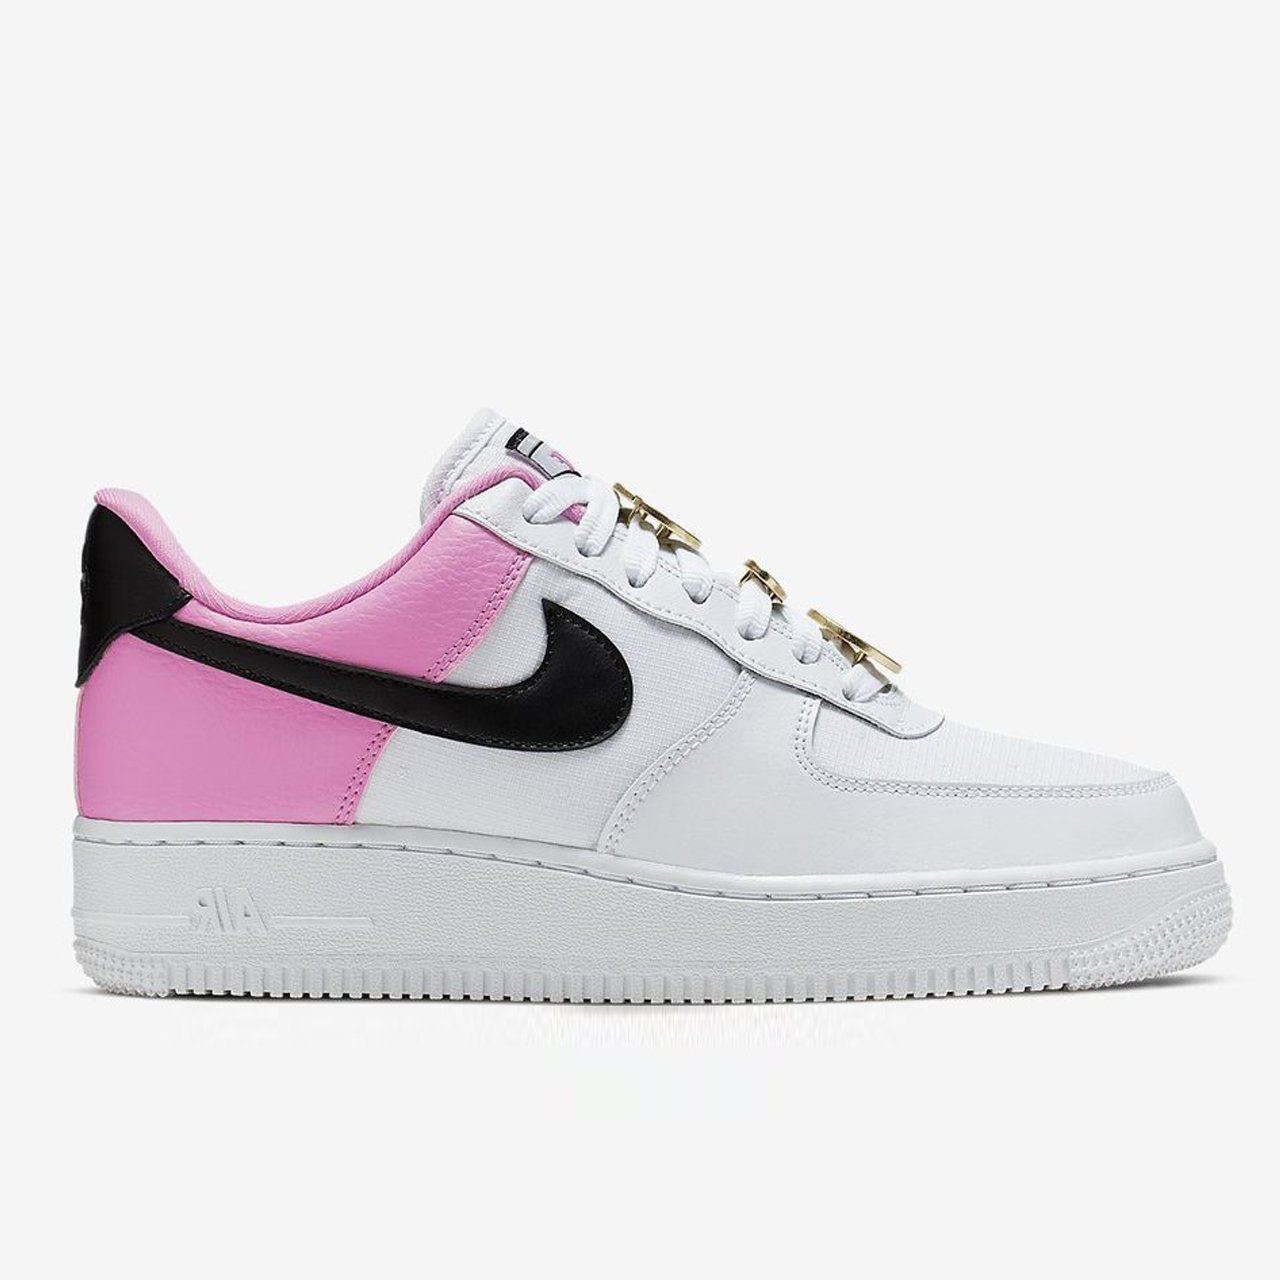 air force white and pink